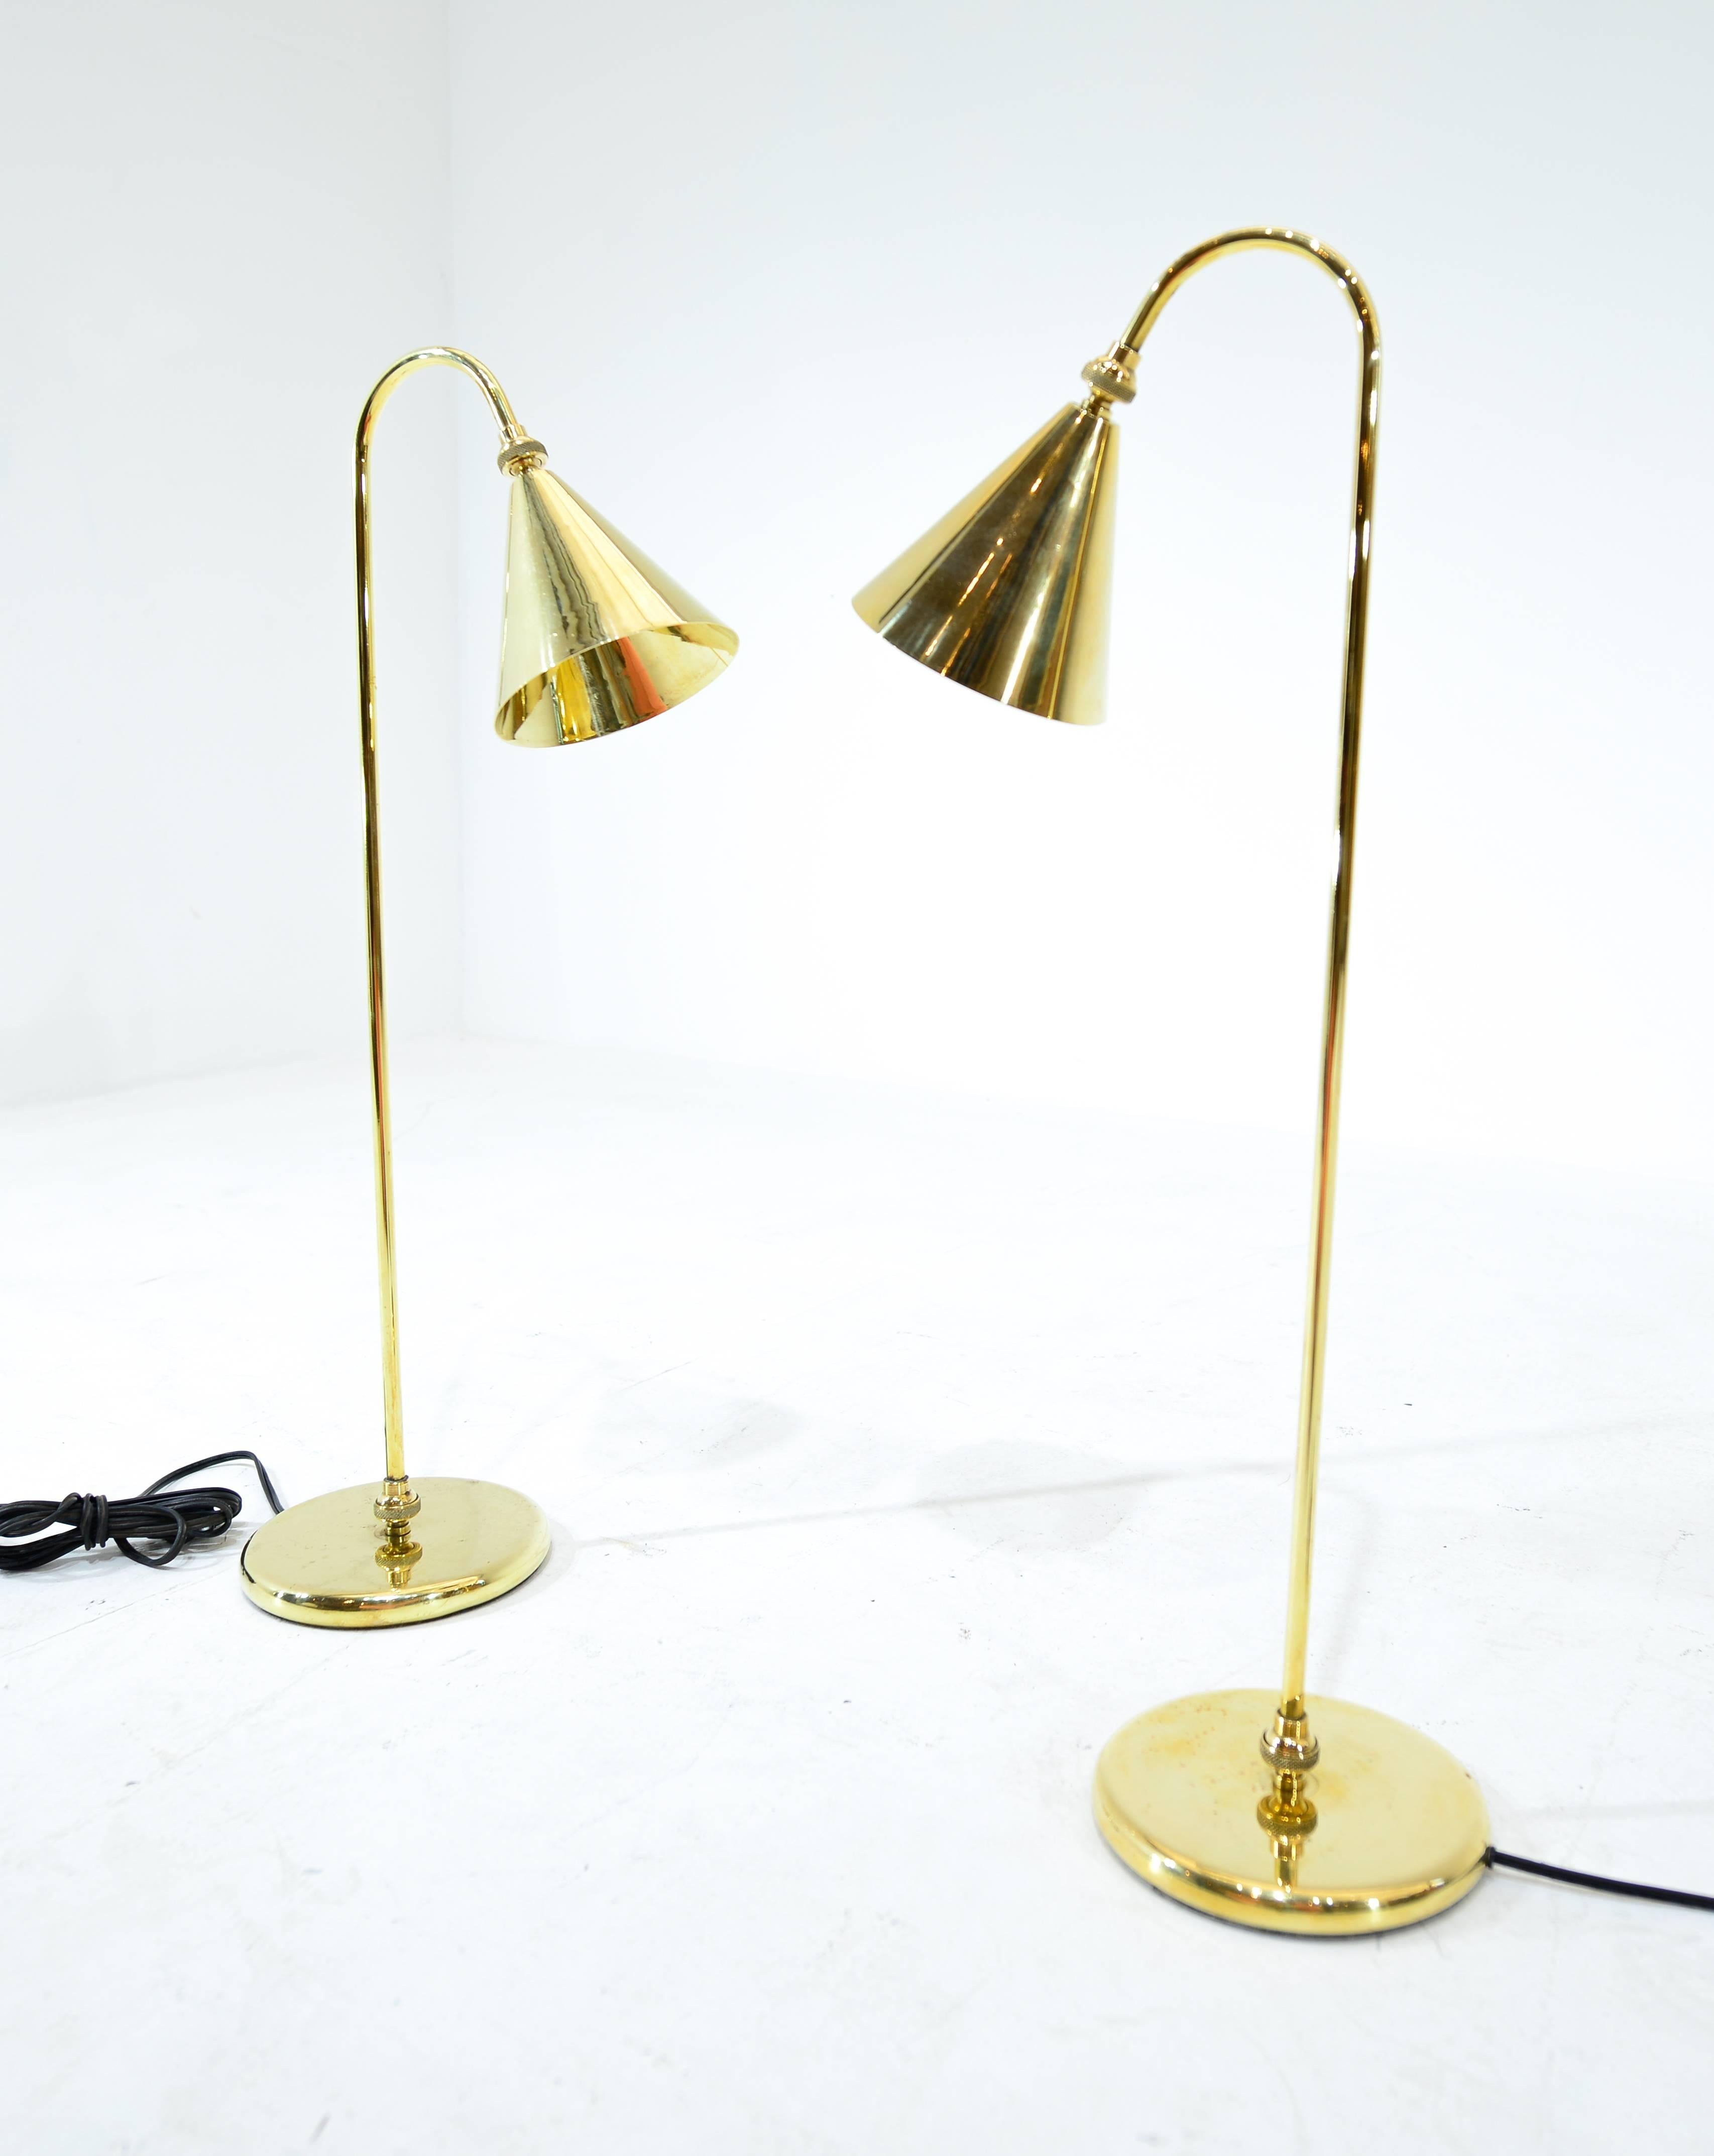 Pair of bronze table lamps.